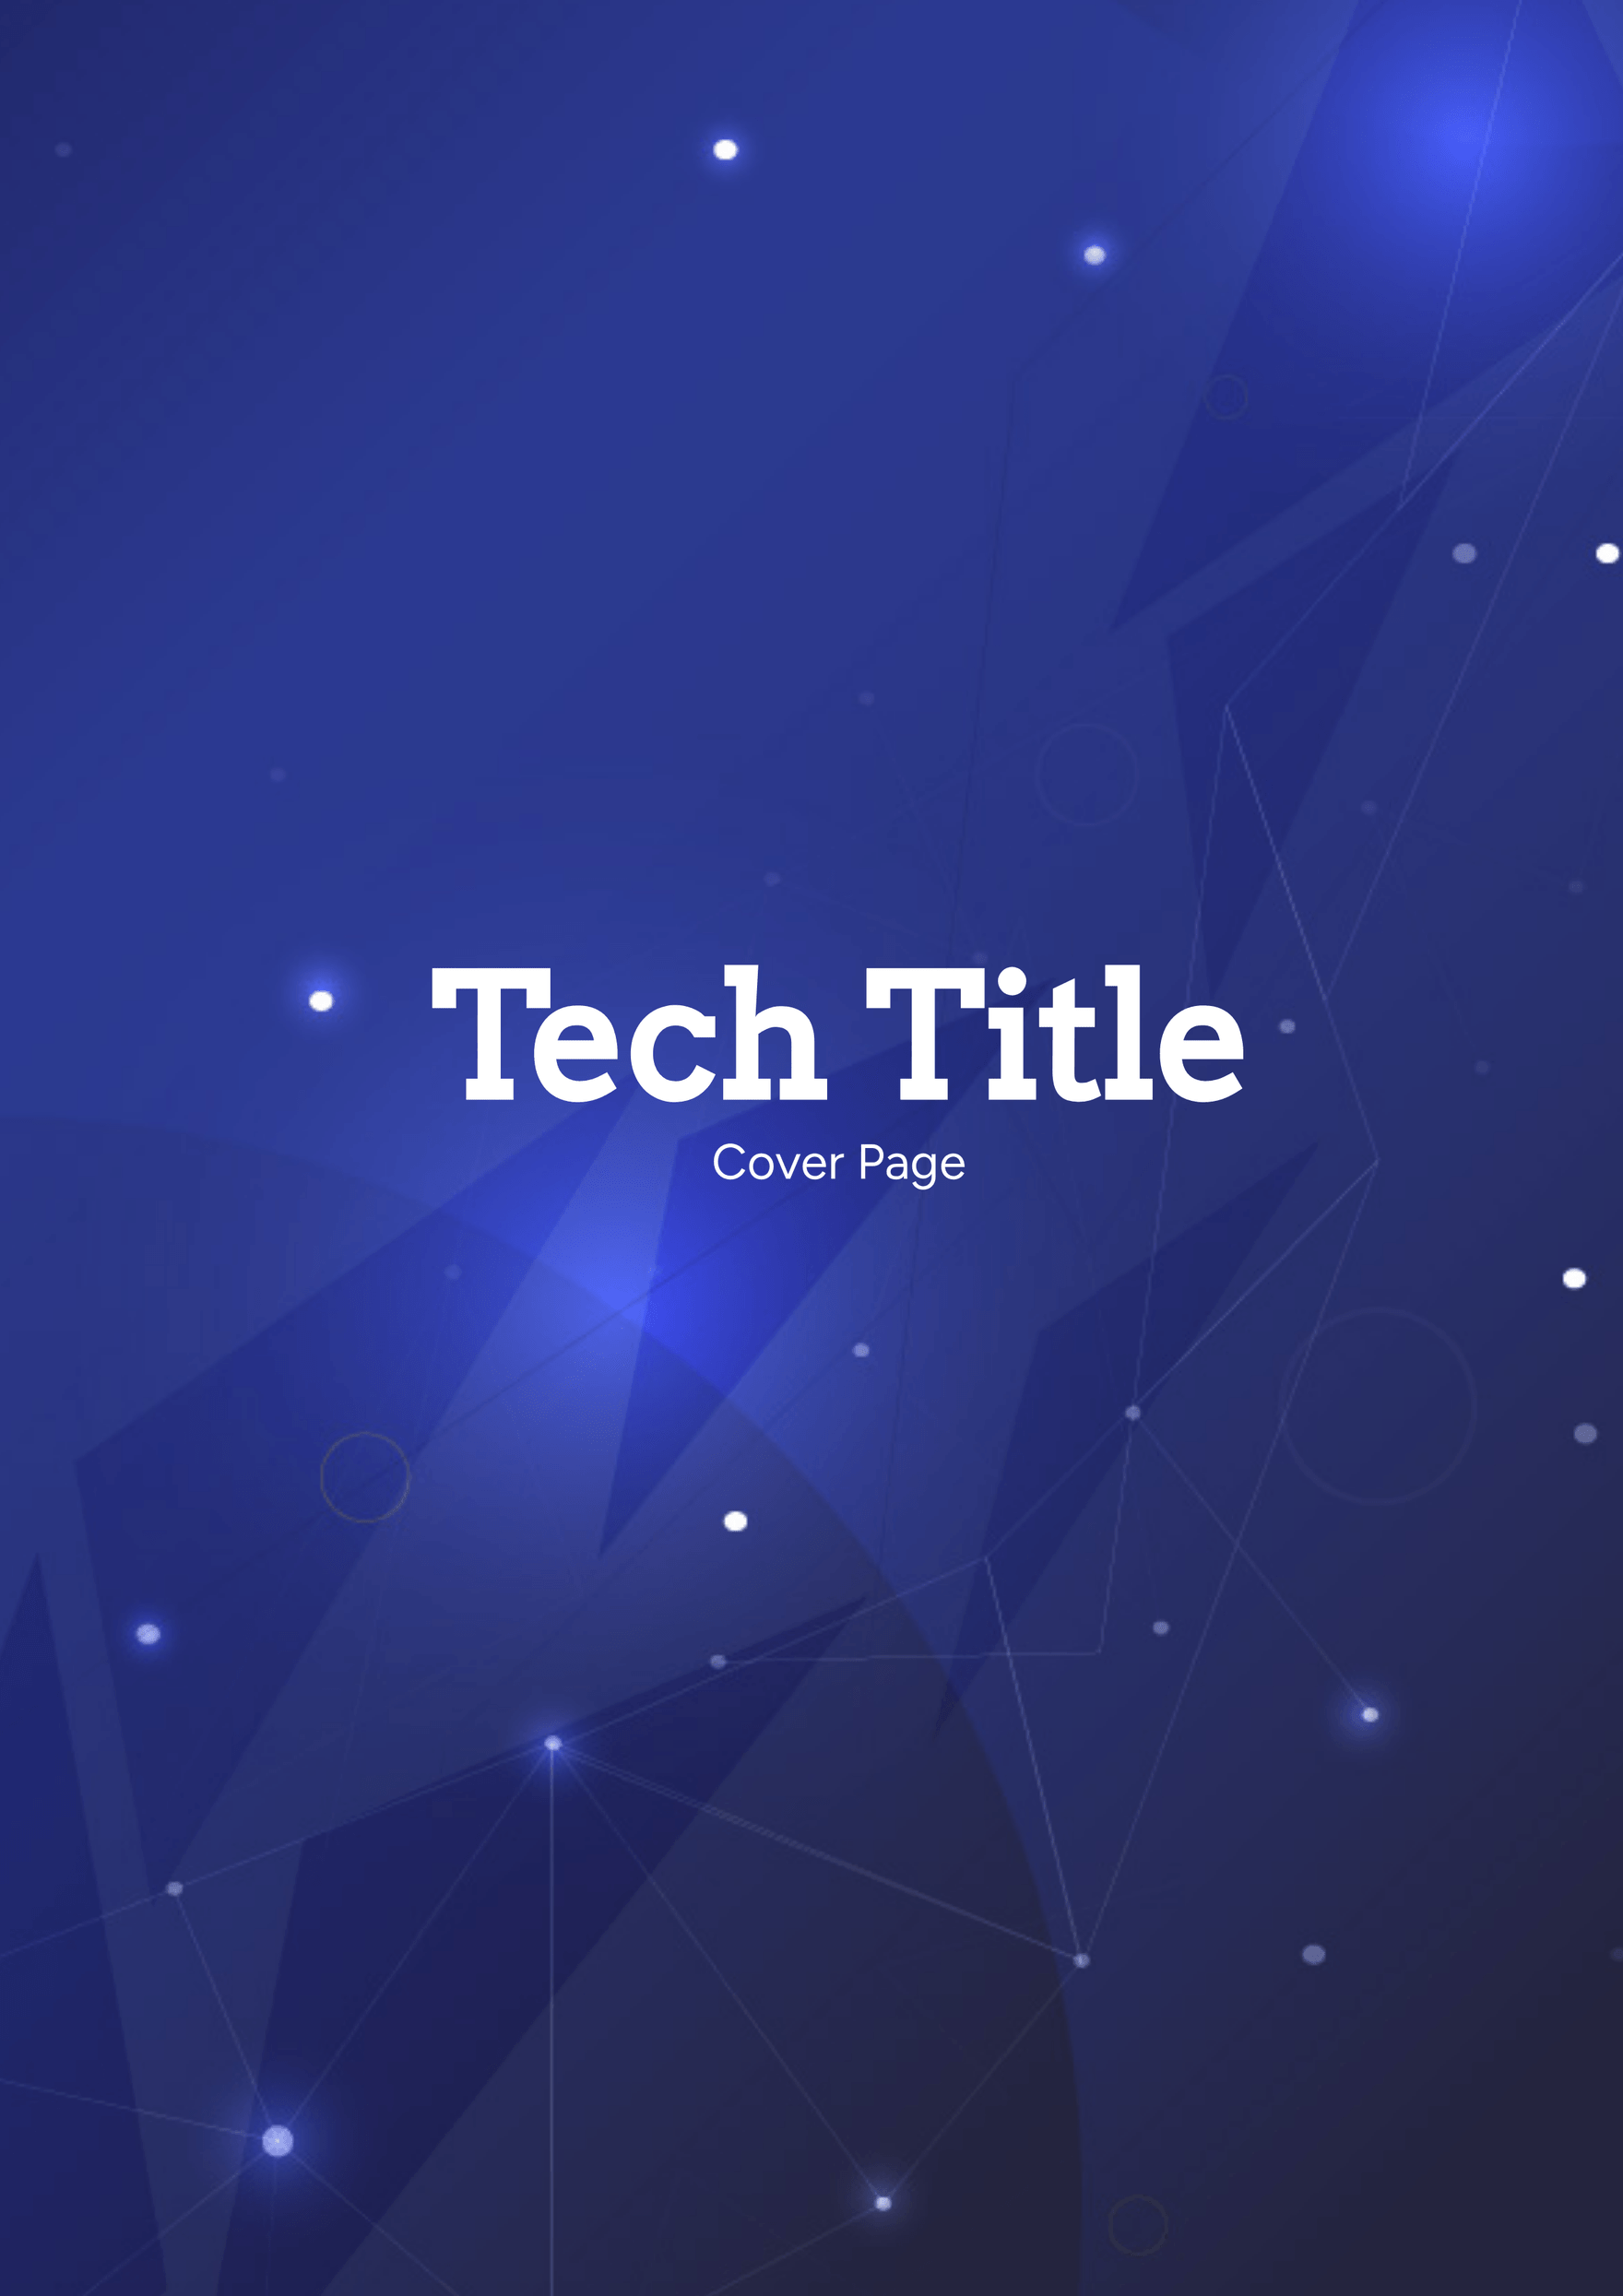 FREE Title Cover Page - Edit Online & Download | Template.net